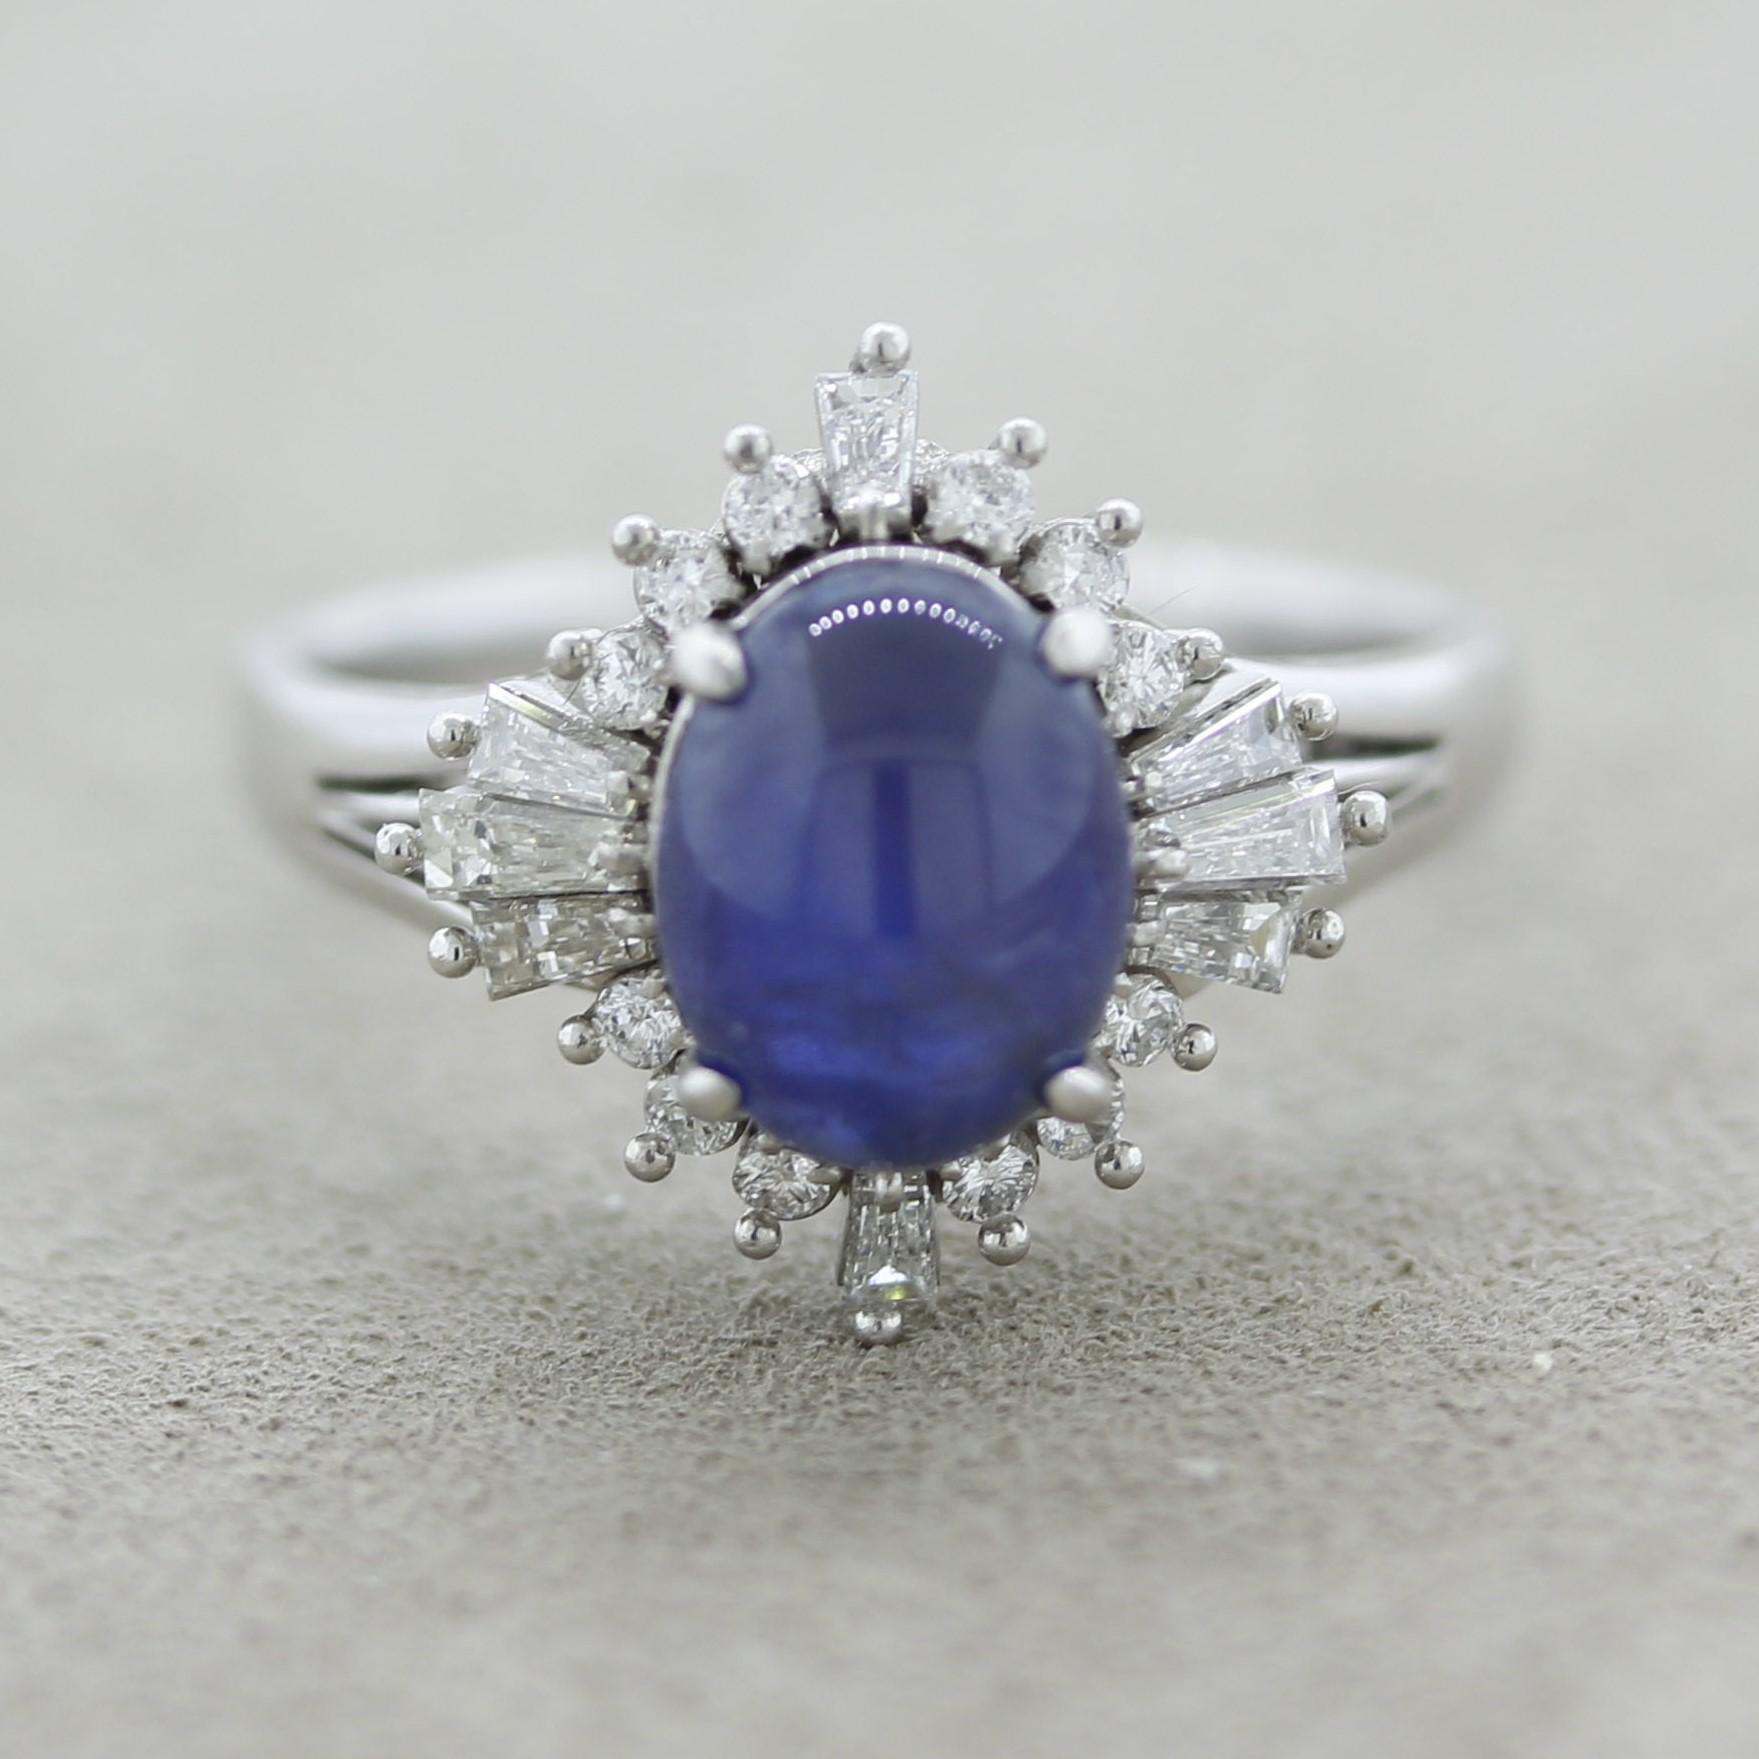 A fun and stylish ring that can be worn casual daily or dressed up for a night out. It features a 3.32 carat natural star sapphire, which has no treatment of any kind. It is complemented by 0.55 carats of baguette and round brilliant-cut diamonds